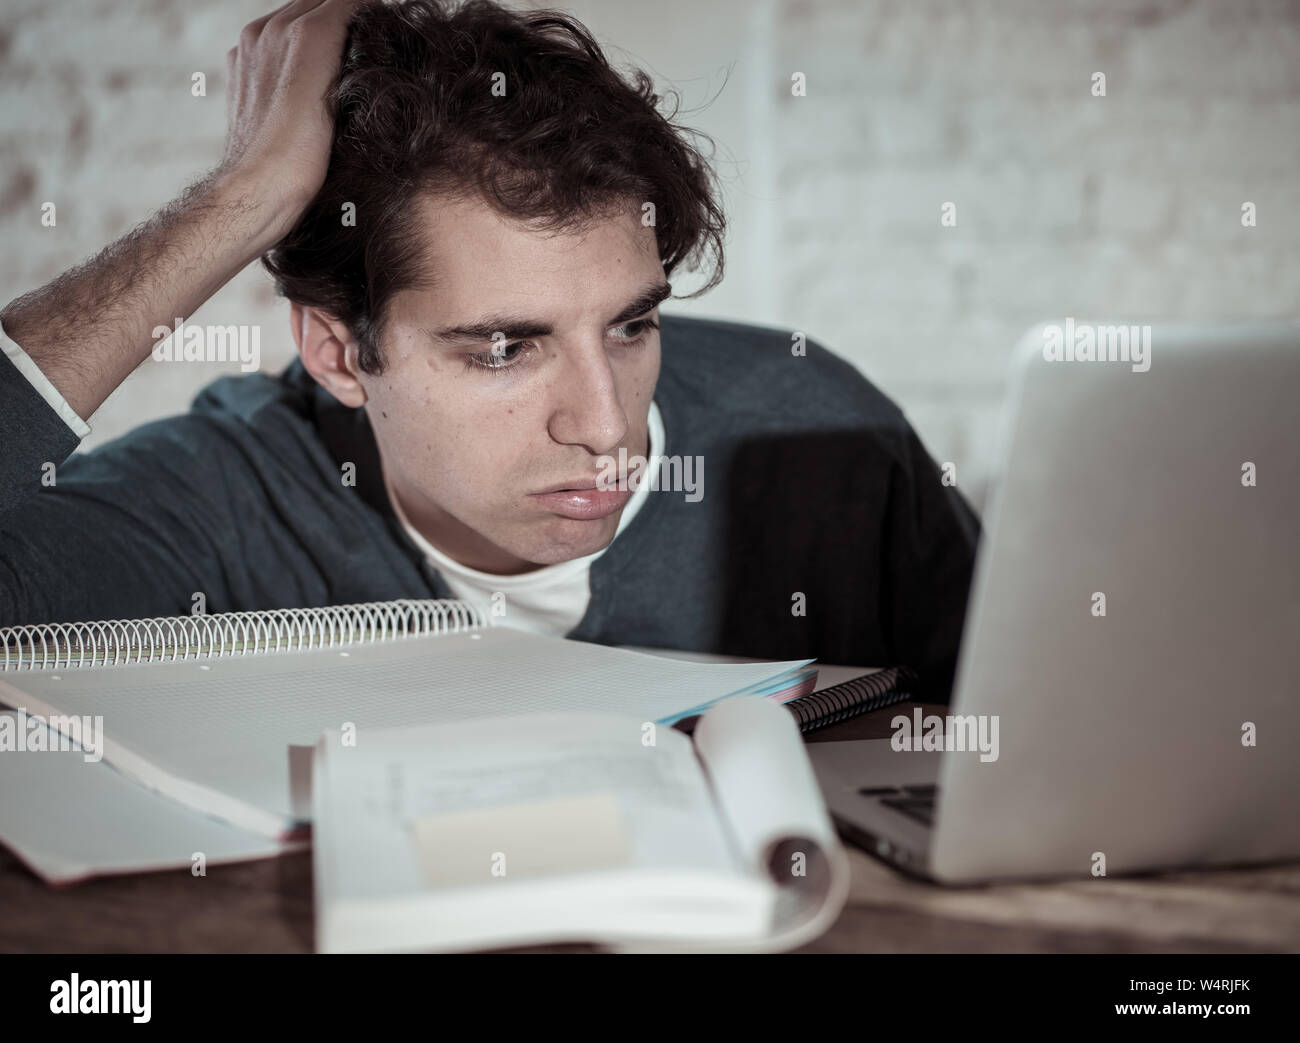 Overworked and tired male student working late at night on laptop trying not to fall asleep feeling fatigued, worried and sad. Moody dark light. Final Stock Photo